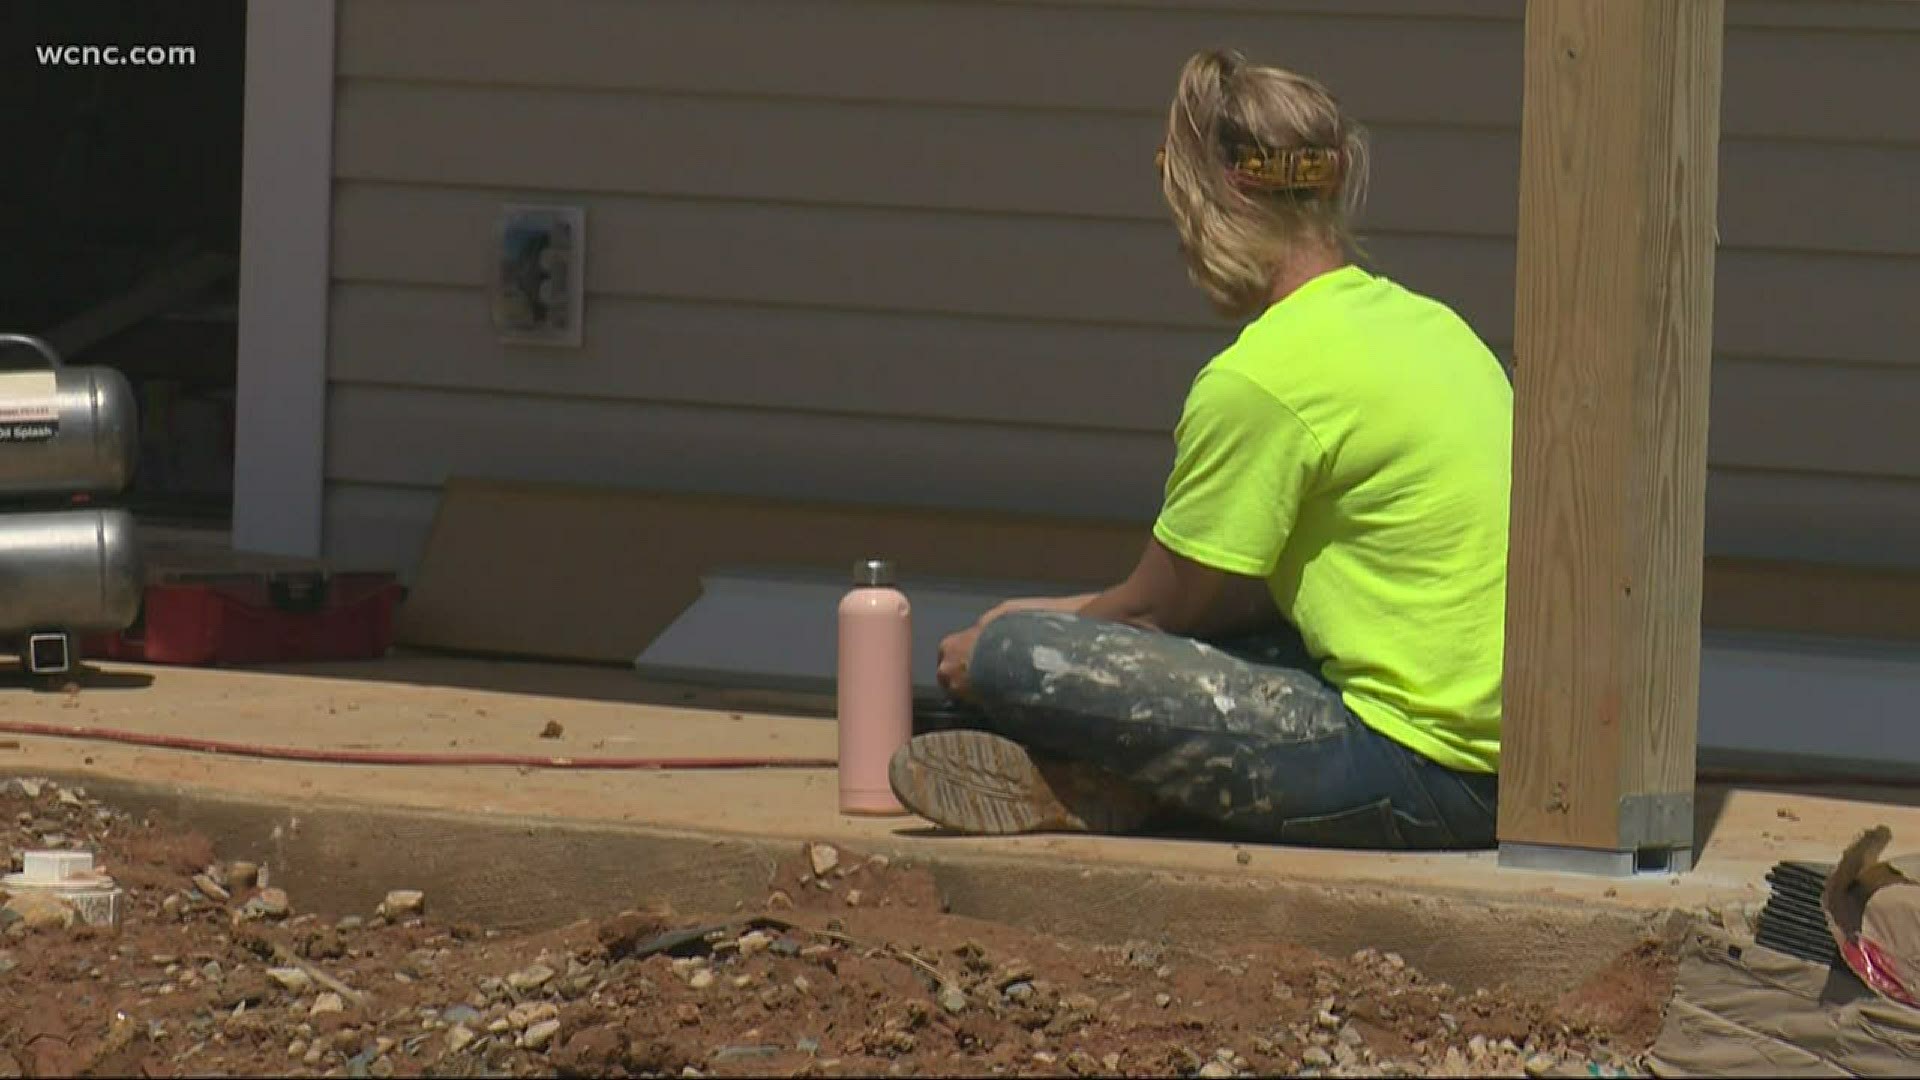 Habitat for humanity relies on community volunteers to build homes for people who need them, and that process has been dramatically slowed by the coronavirus crisis.